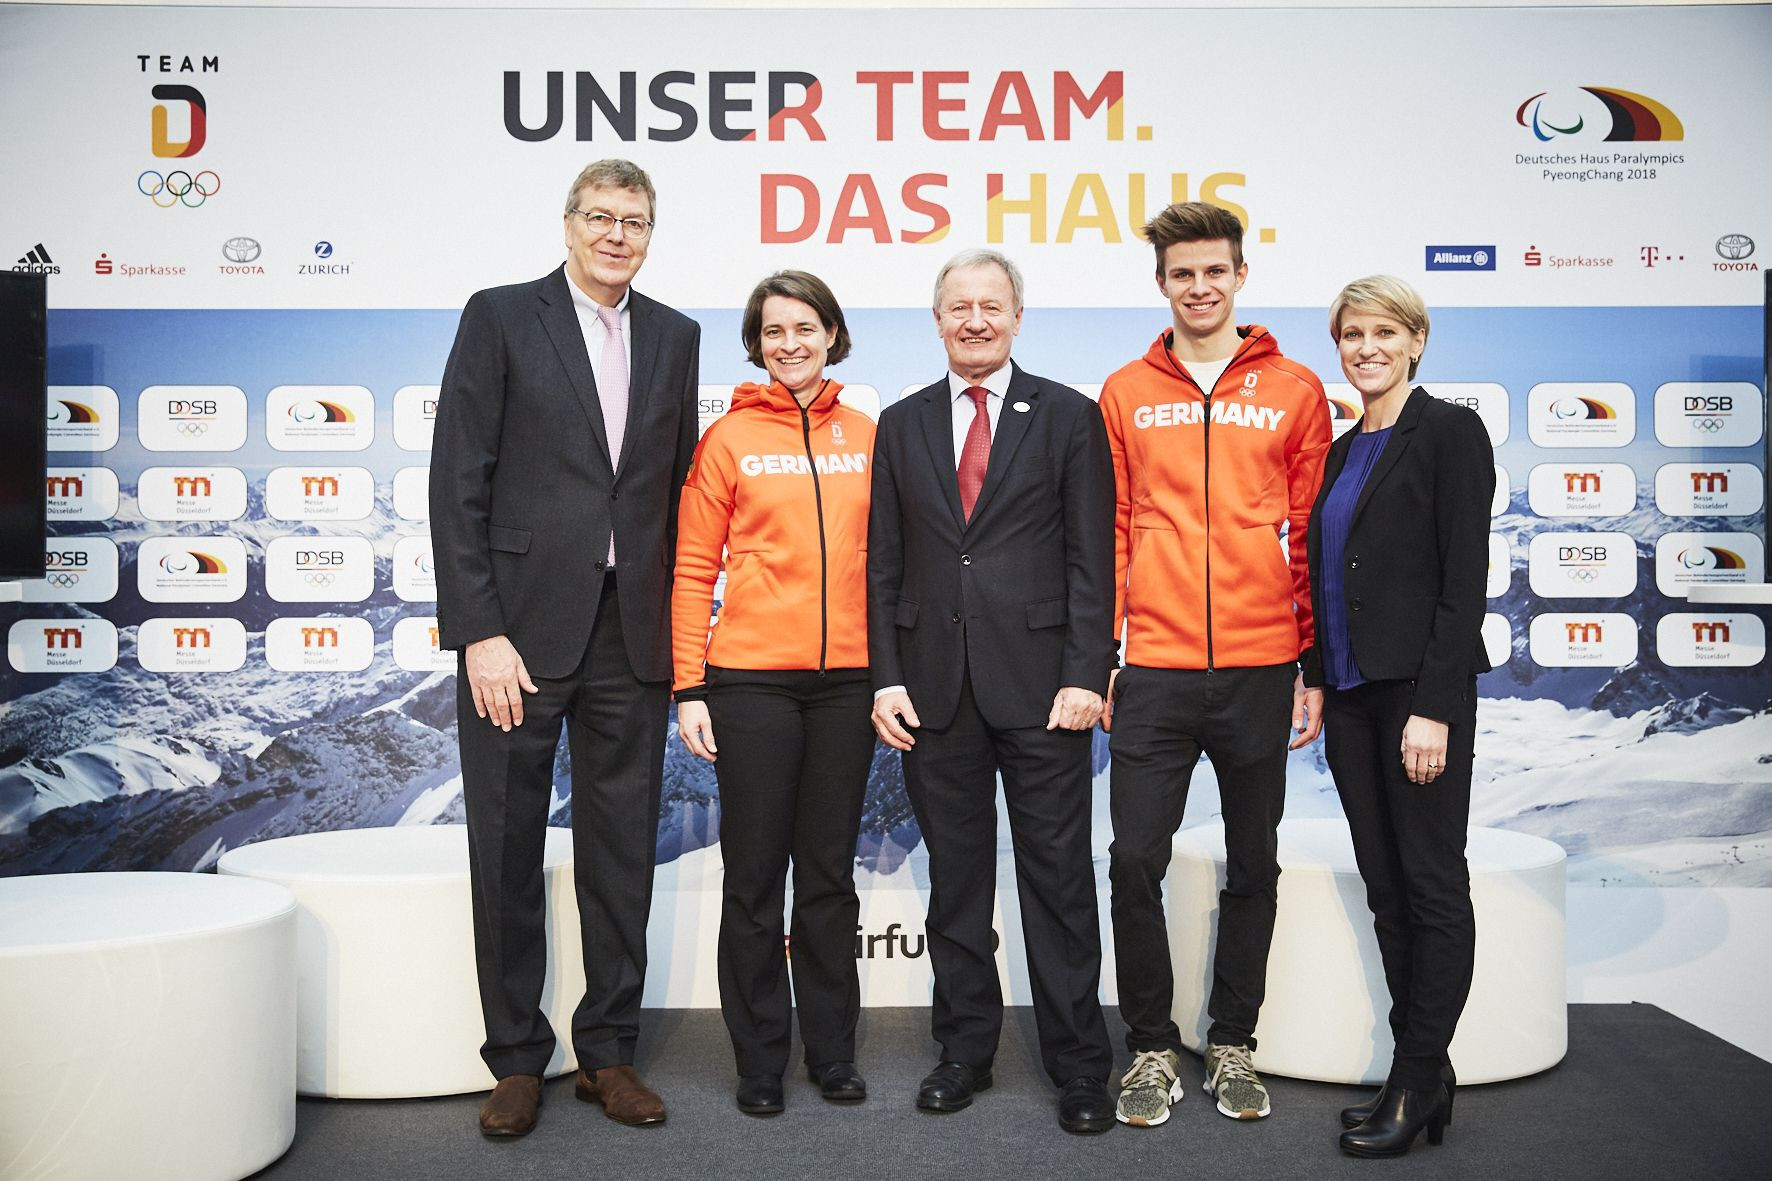 A German House will be in operation during the Winter Olympic and Paralympic Games ©DOSB